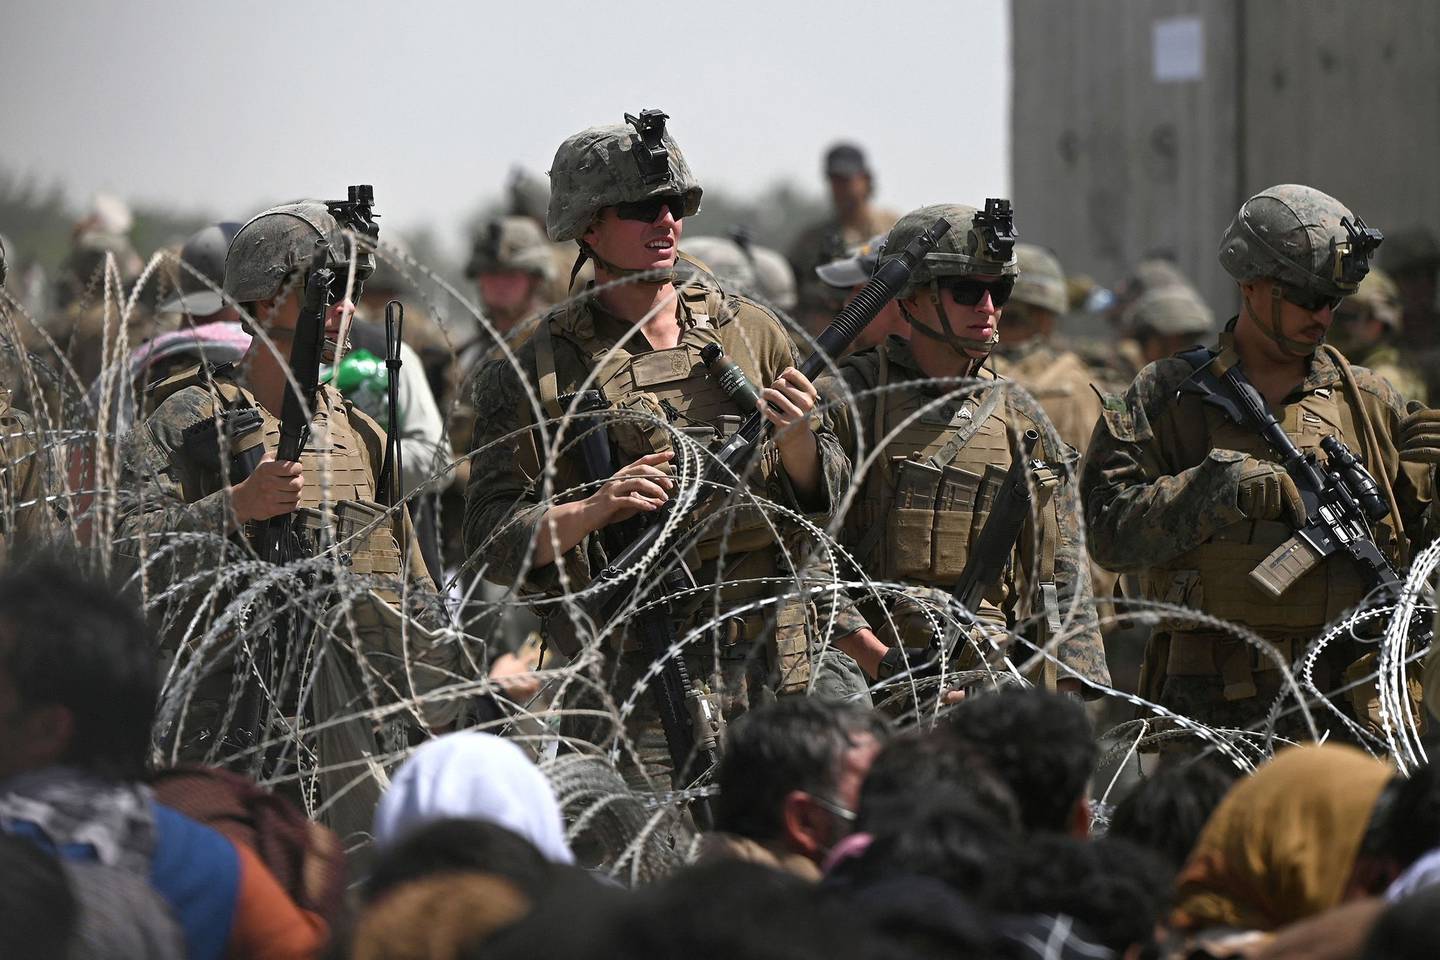 U.S. soldiers stand guard behind barbed wire as Afghans sit on a roadside near the military part of the airport in Kabul on Aug. 20.